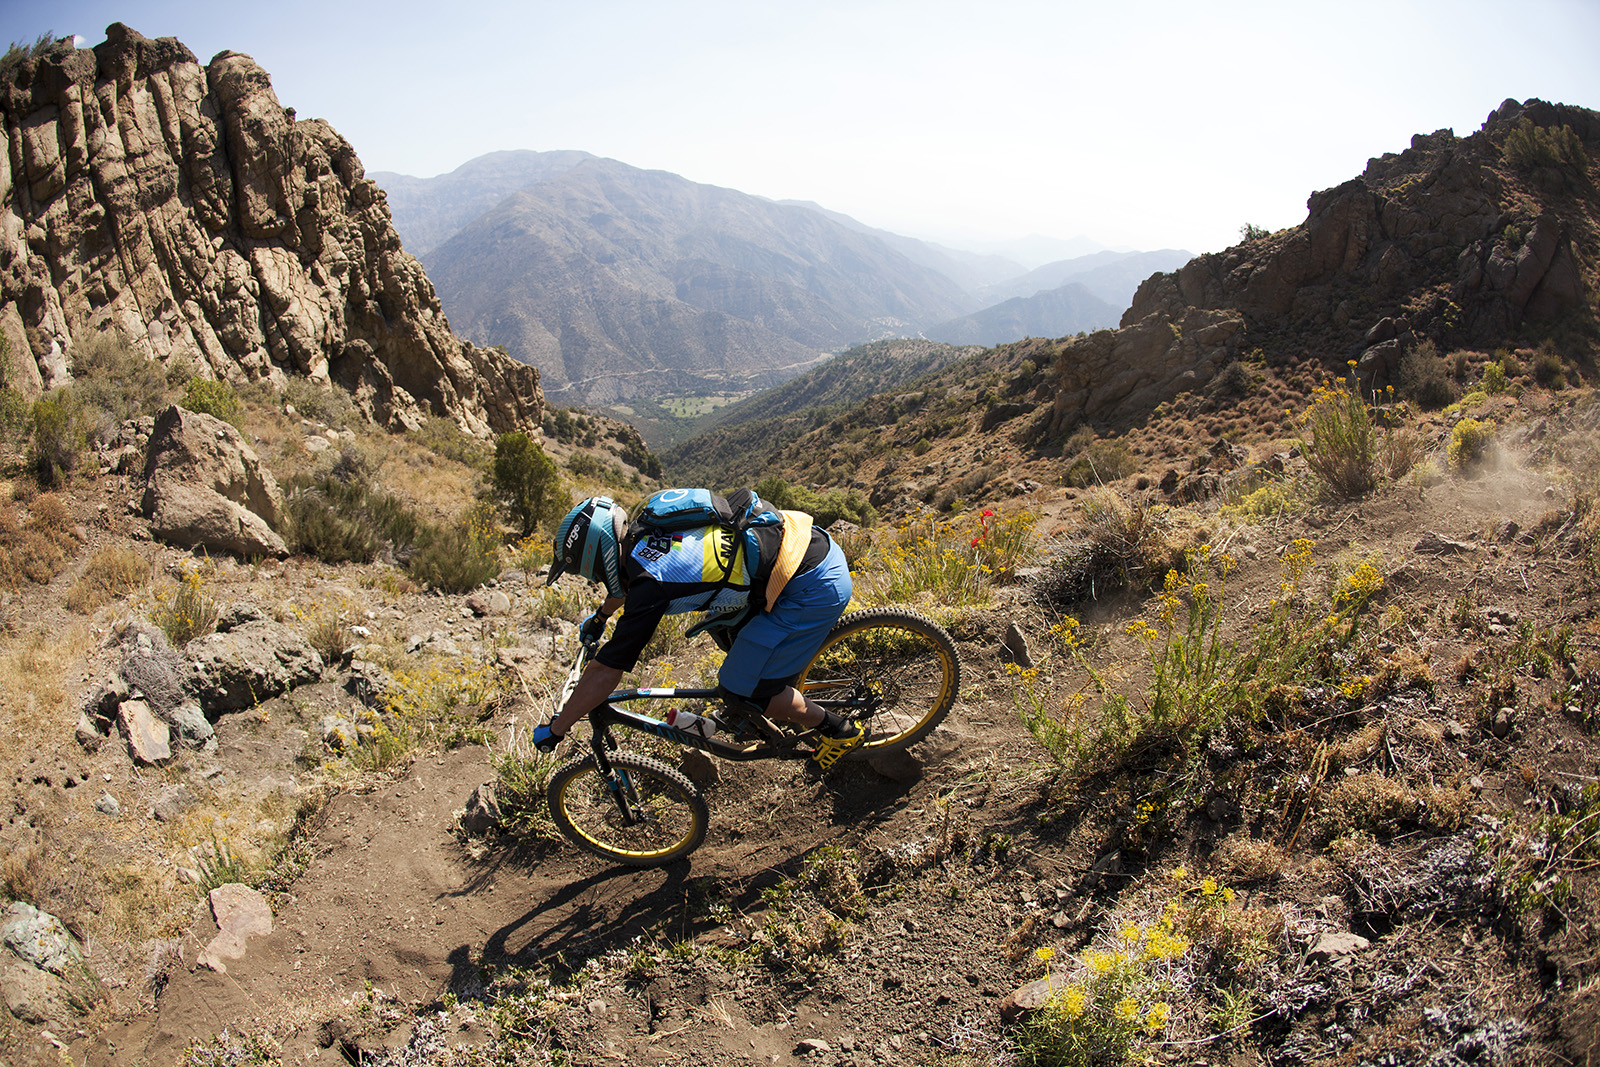 11 February 2015 - Fabien Barel negotiates Stage 5 on Day 1 during the 2015 Andes Pacifico Enduro stage race in Santiago, Chile. Photo by Gary Perkin